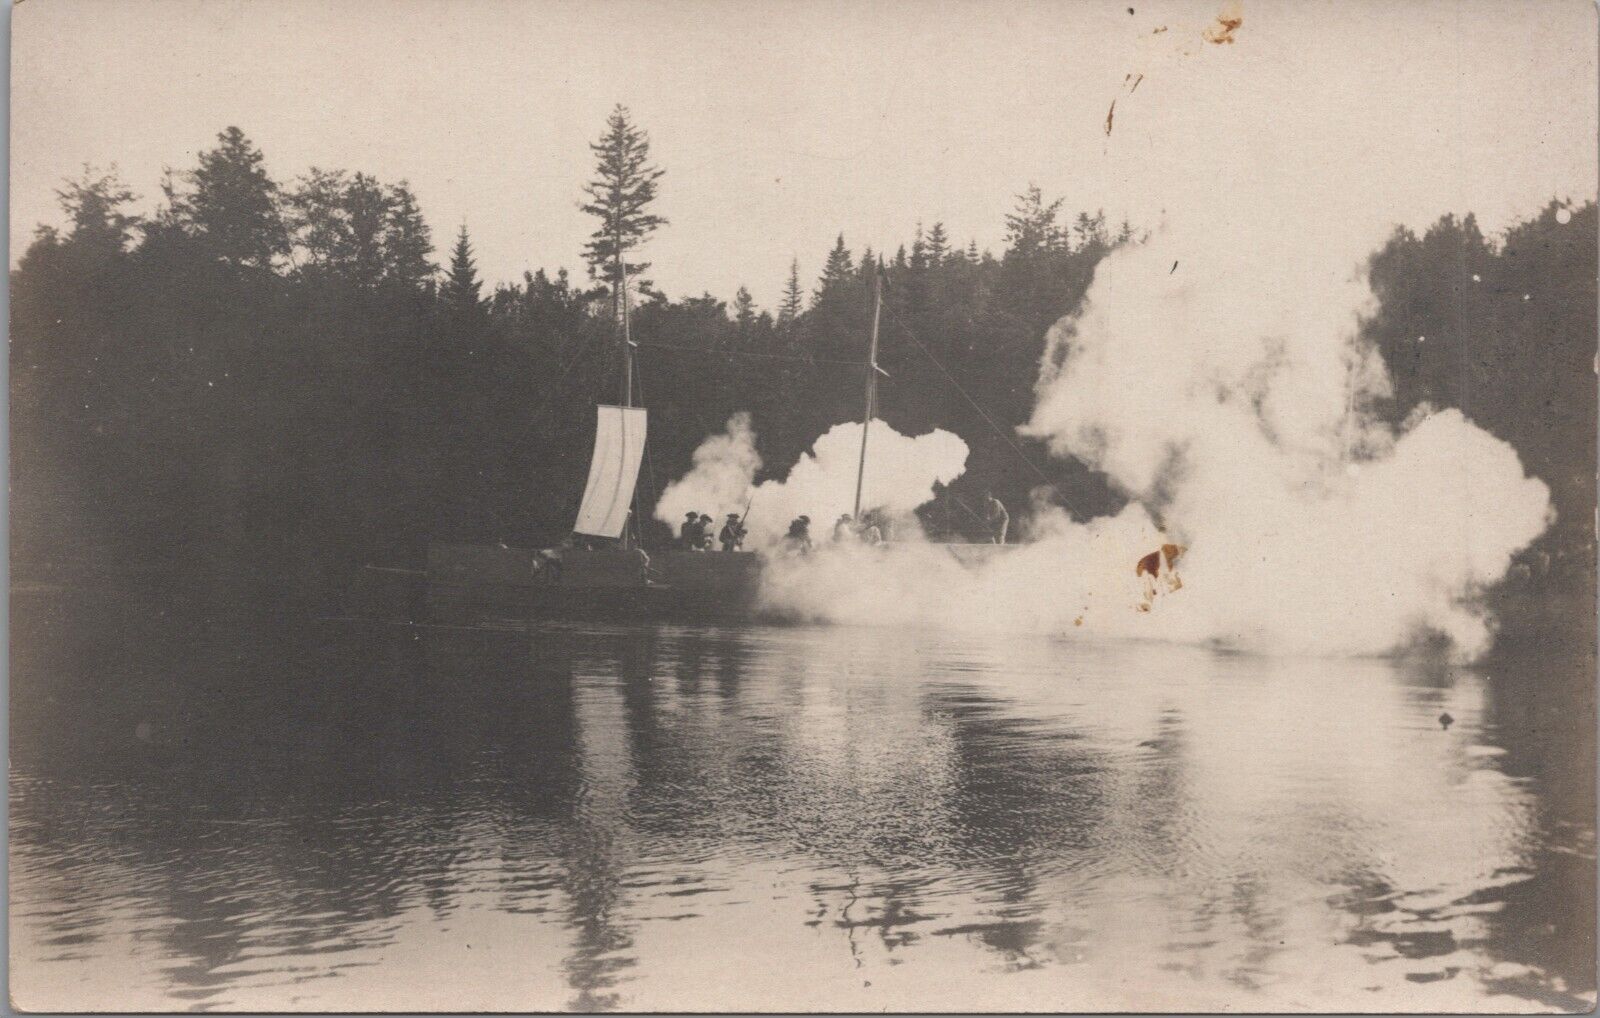 Machias Valley Pageant Battle On The Water Maine 1913 RPPC Postcard - Unposted